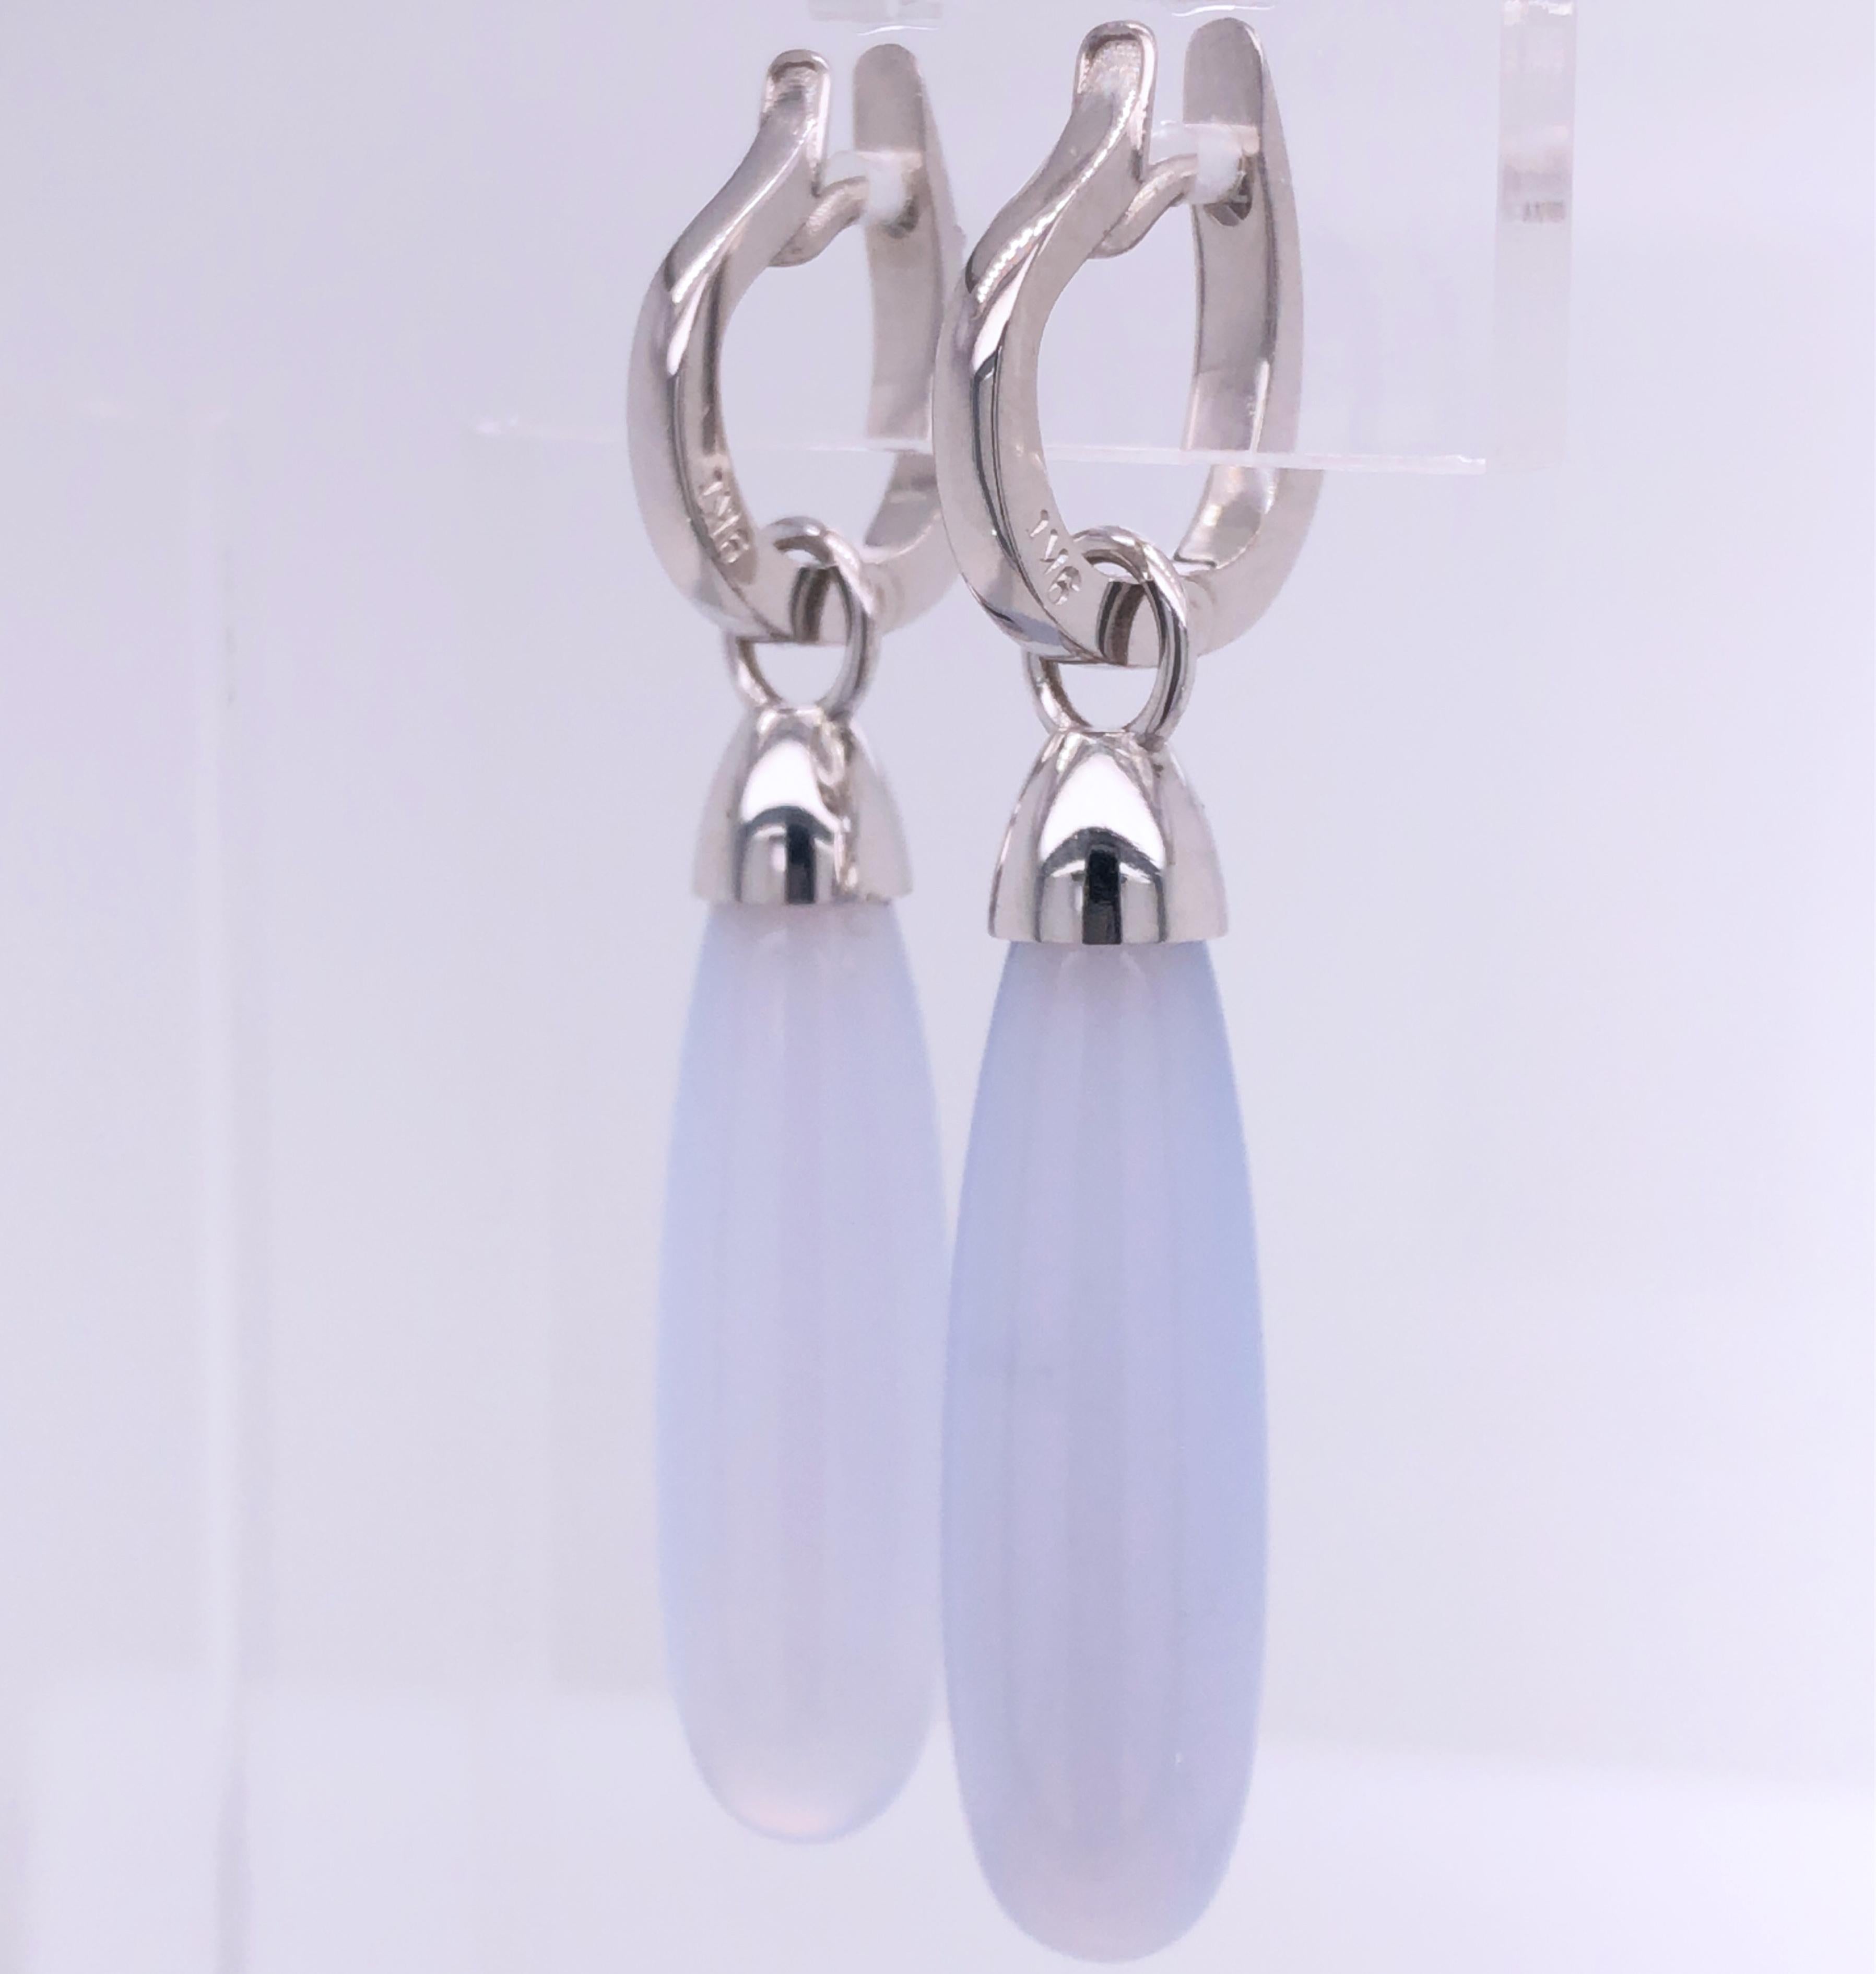 Chic yet timeless Removable Earrings featuring two Natural Light Blue Chalcedony Drop Cut in a White Gold Setting.
This brilliant setting allows to wear these lovely earrings both ways.
In our smart Black Box and Pouch.
Total Lenght 2.04inches,